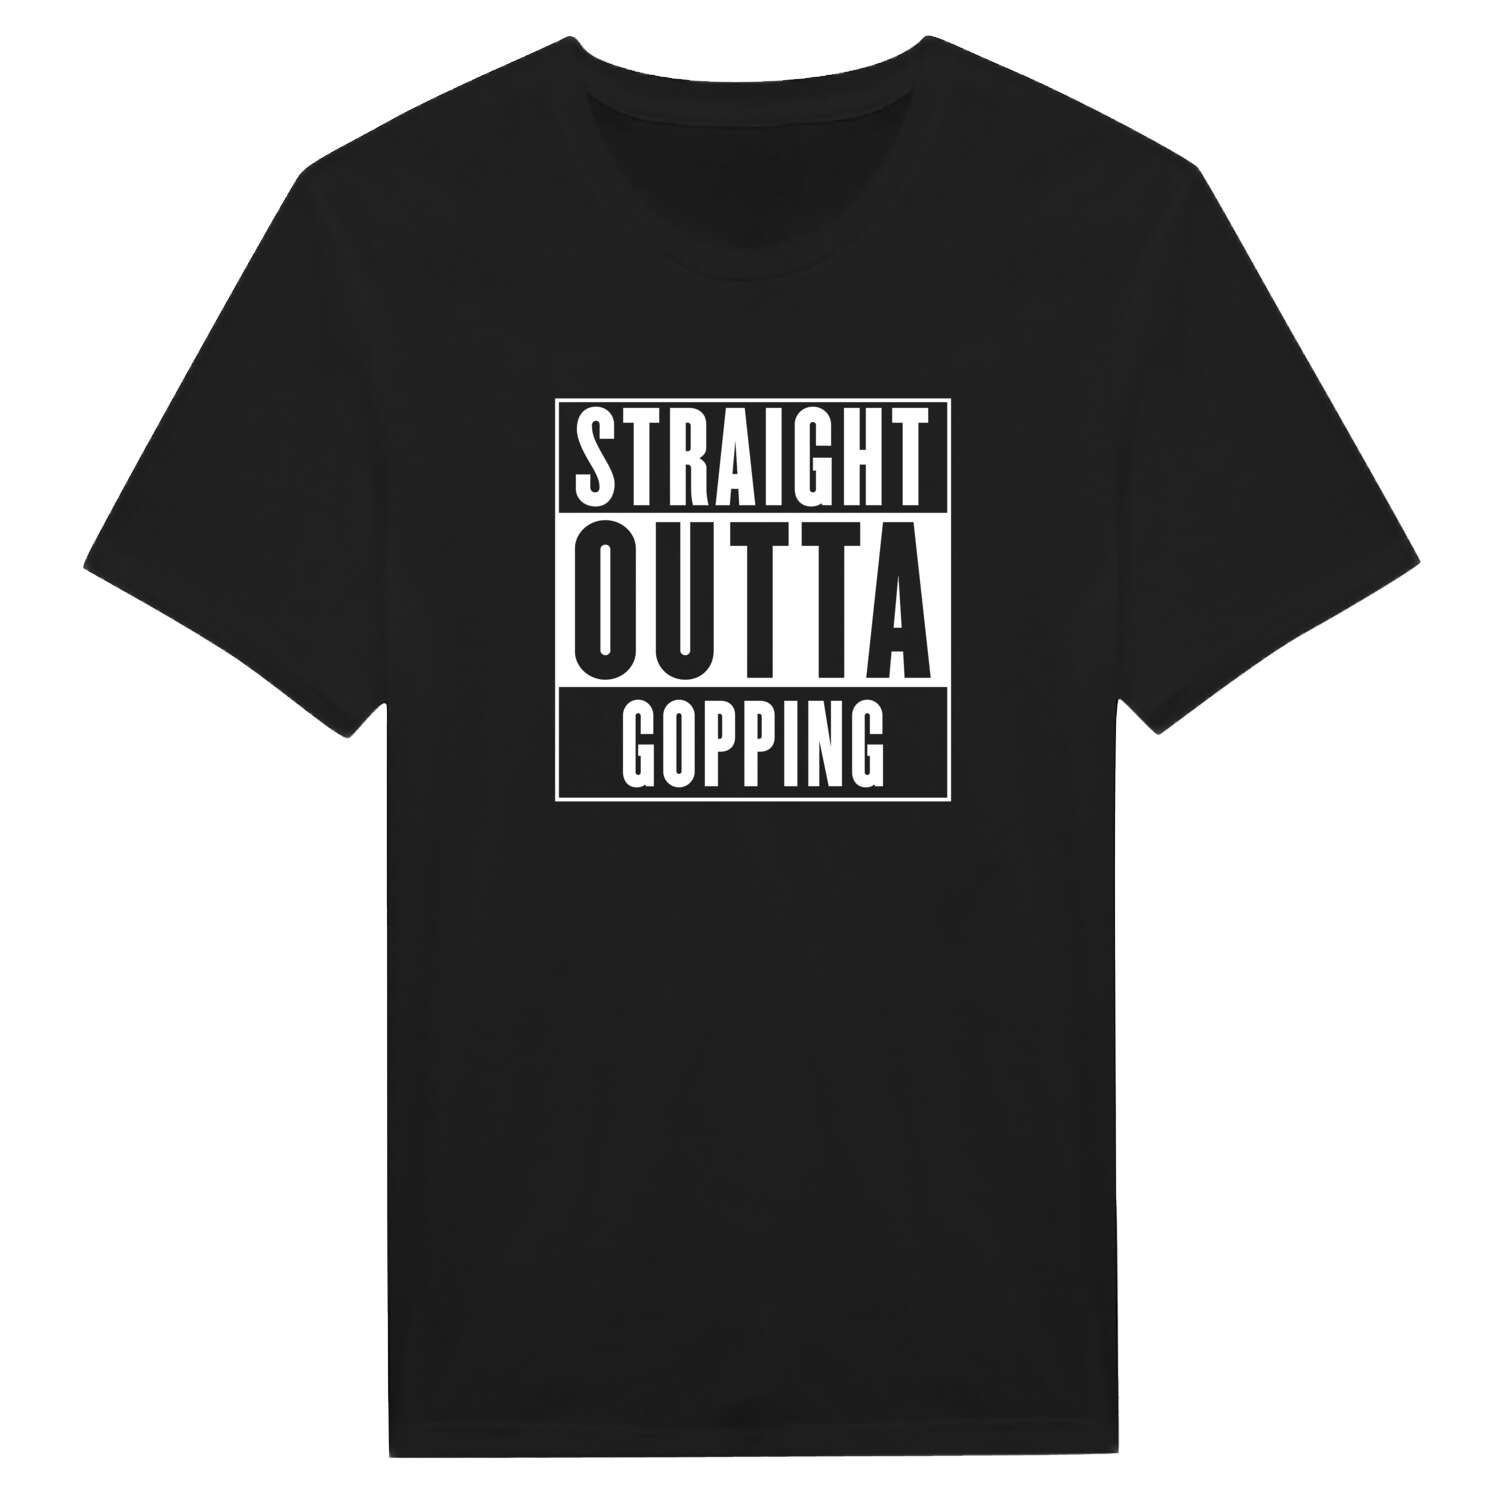 Gopping T-Shirt »Straight Outta«